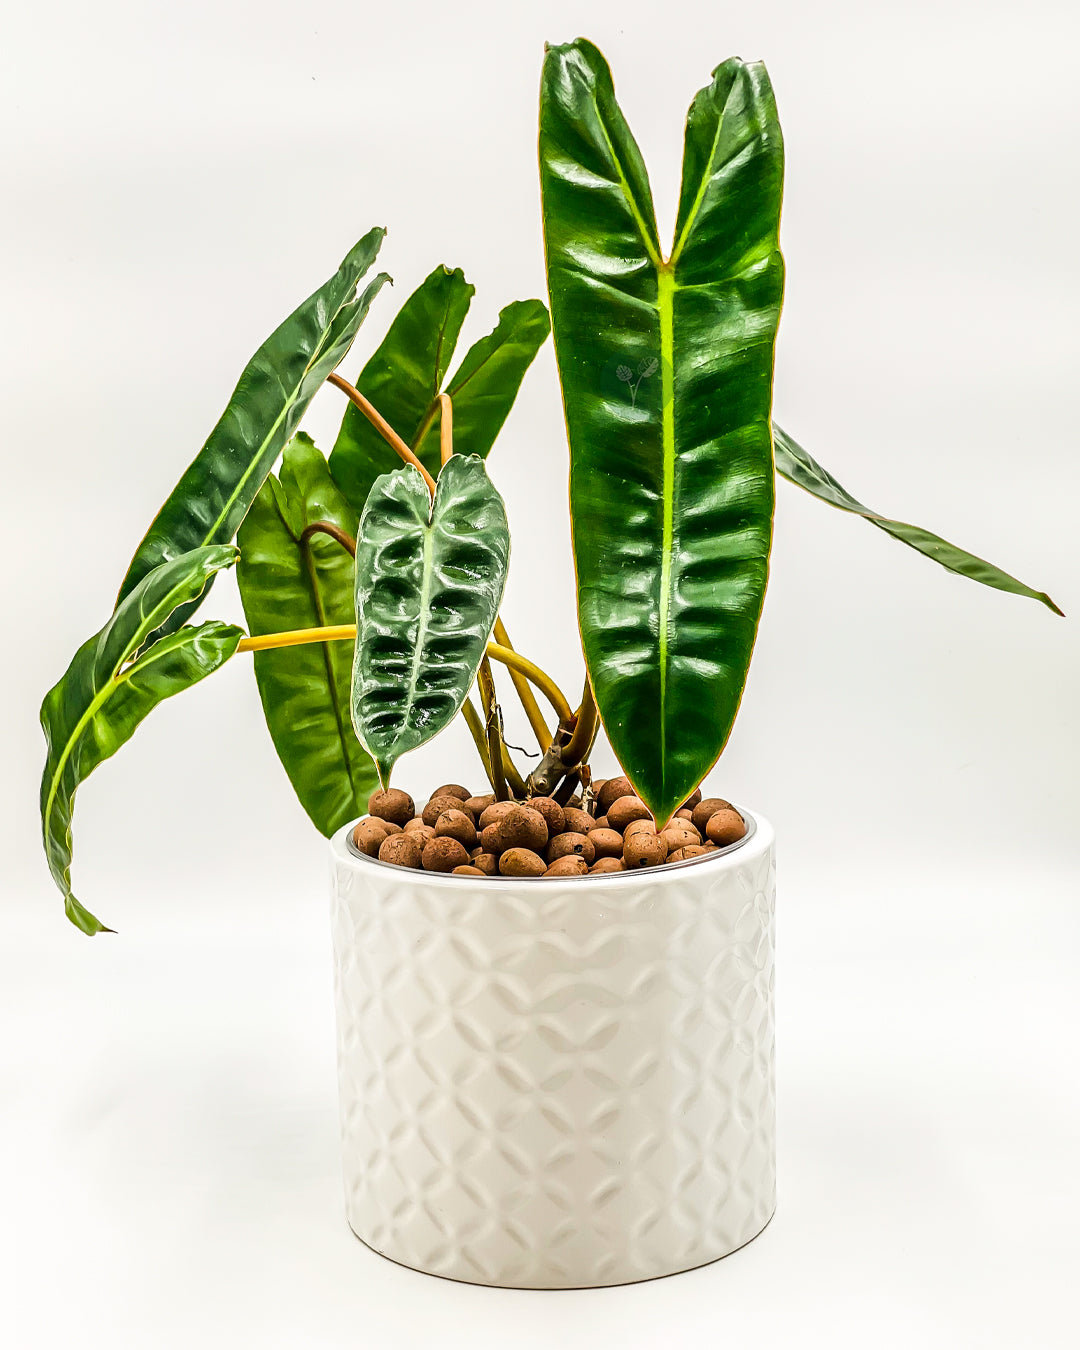 philodendron-billietiae-variegated-for-sale